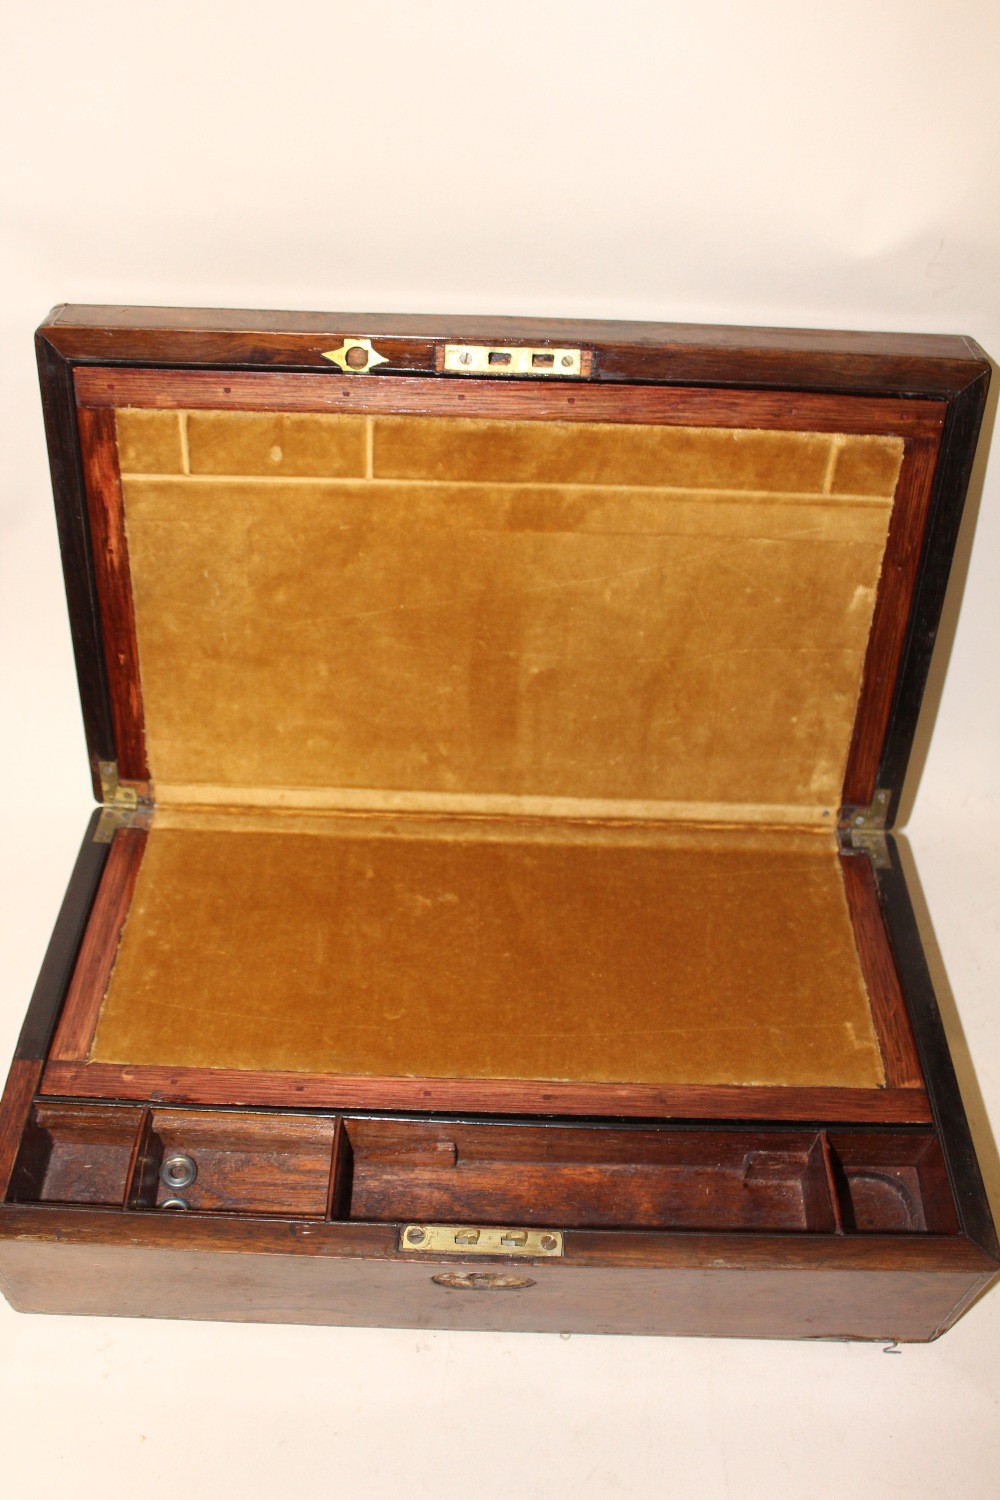 AN ANTIQUE ROSEWOOD WRITING SLOPE WITH MOTHER OF PEARL CARTOUCHE, TOGETHER WITH A SMALL WOODEN STOOL - Image 2 of 2